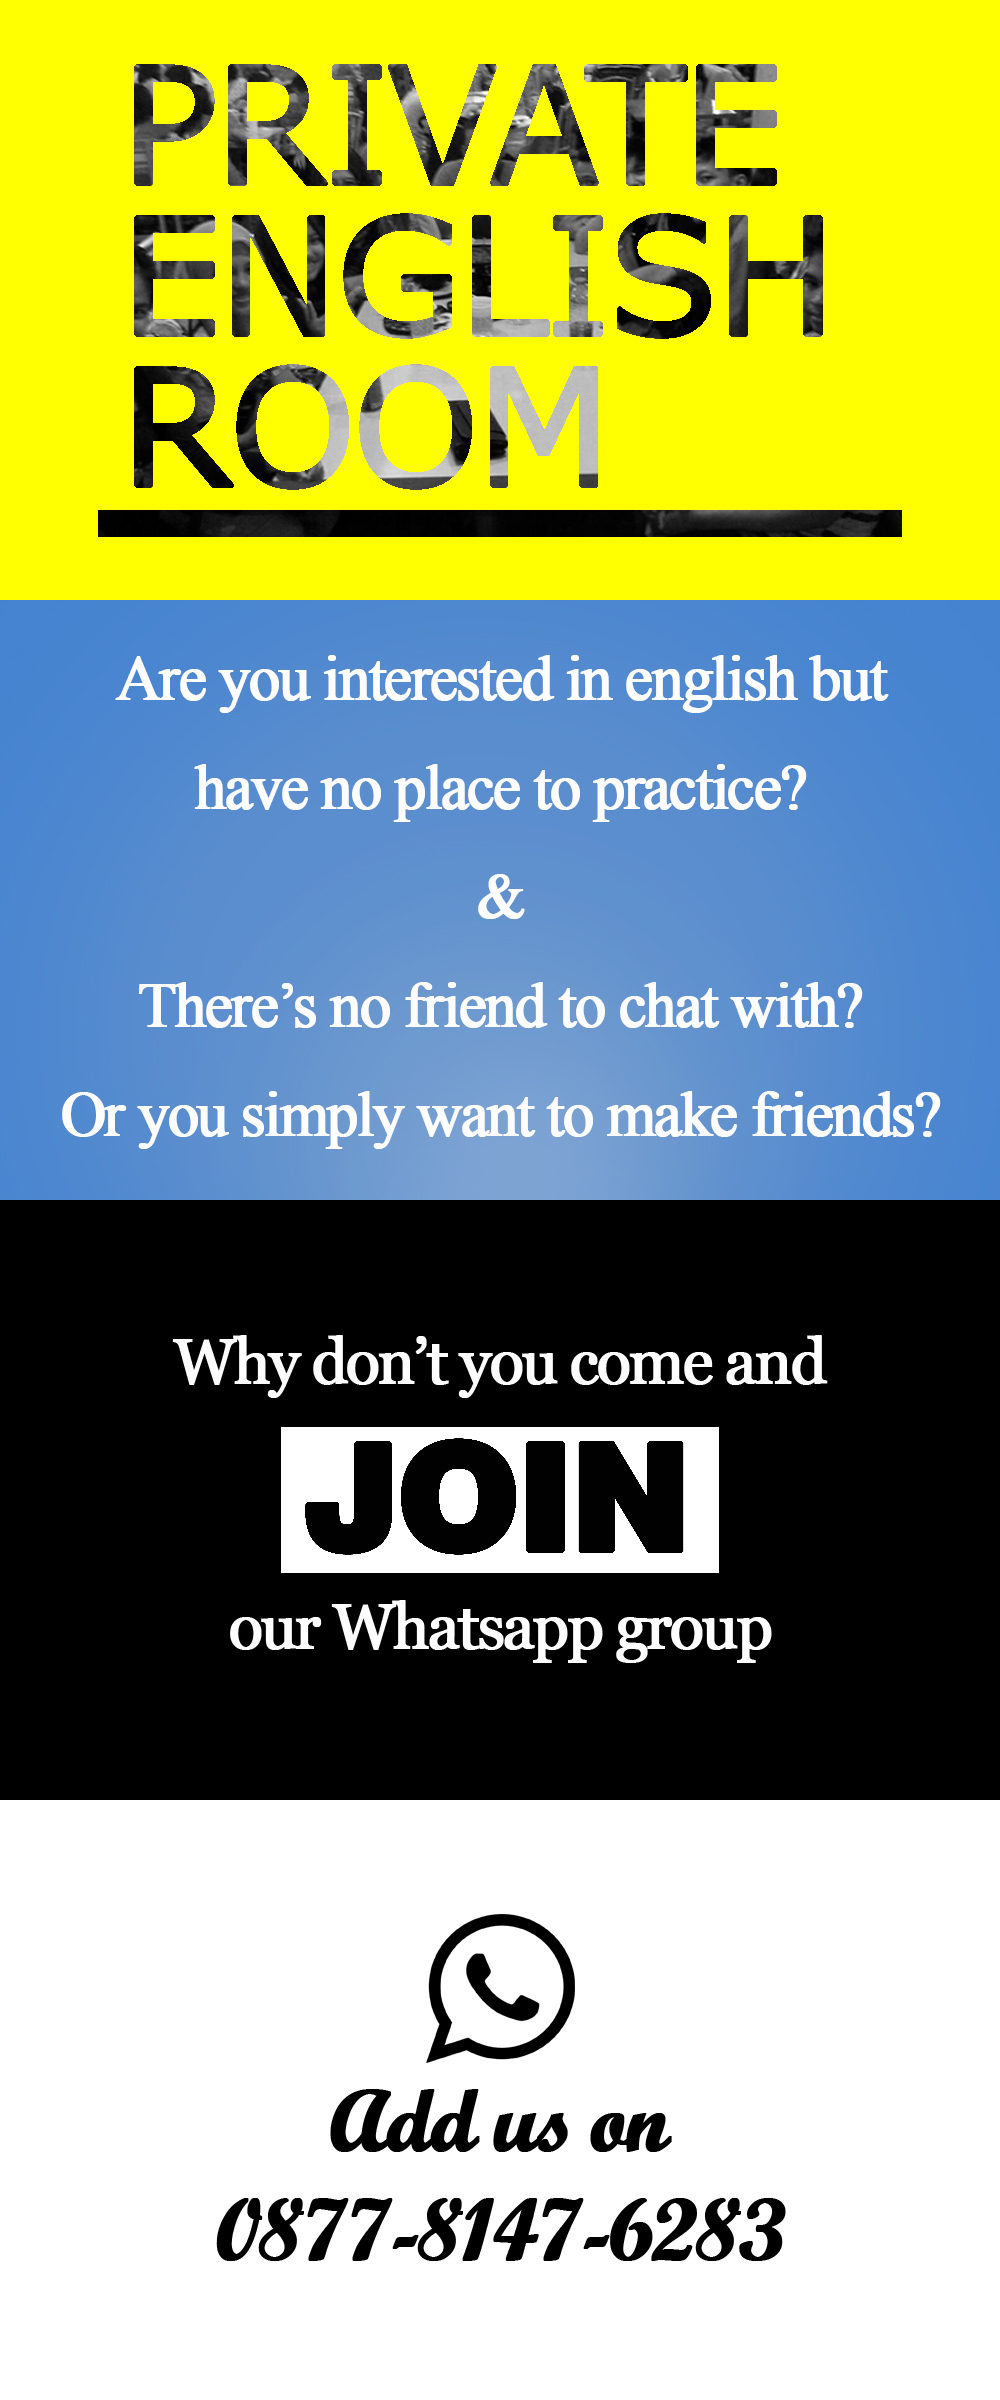 come--join-us-at-quotprivate-english-room---whatsapp-english-groupquot